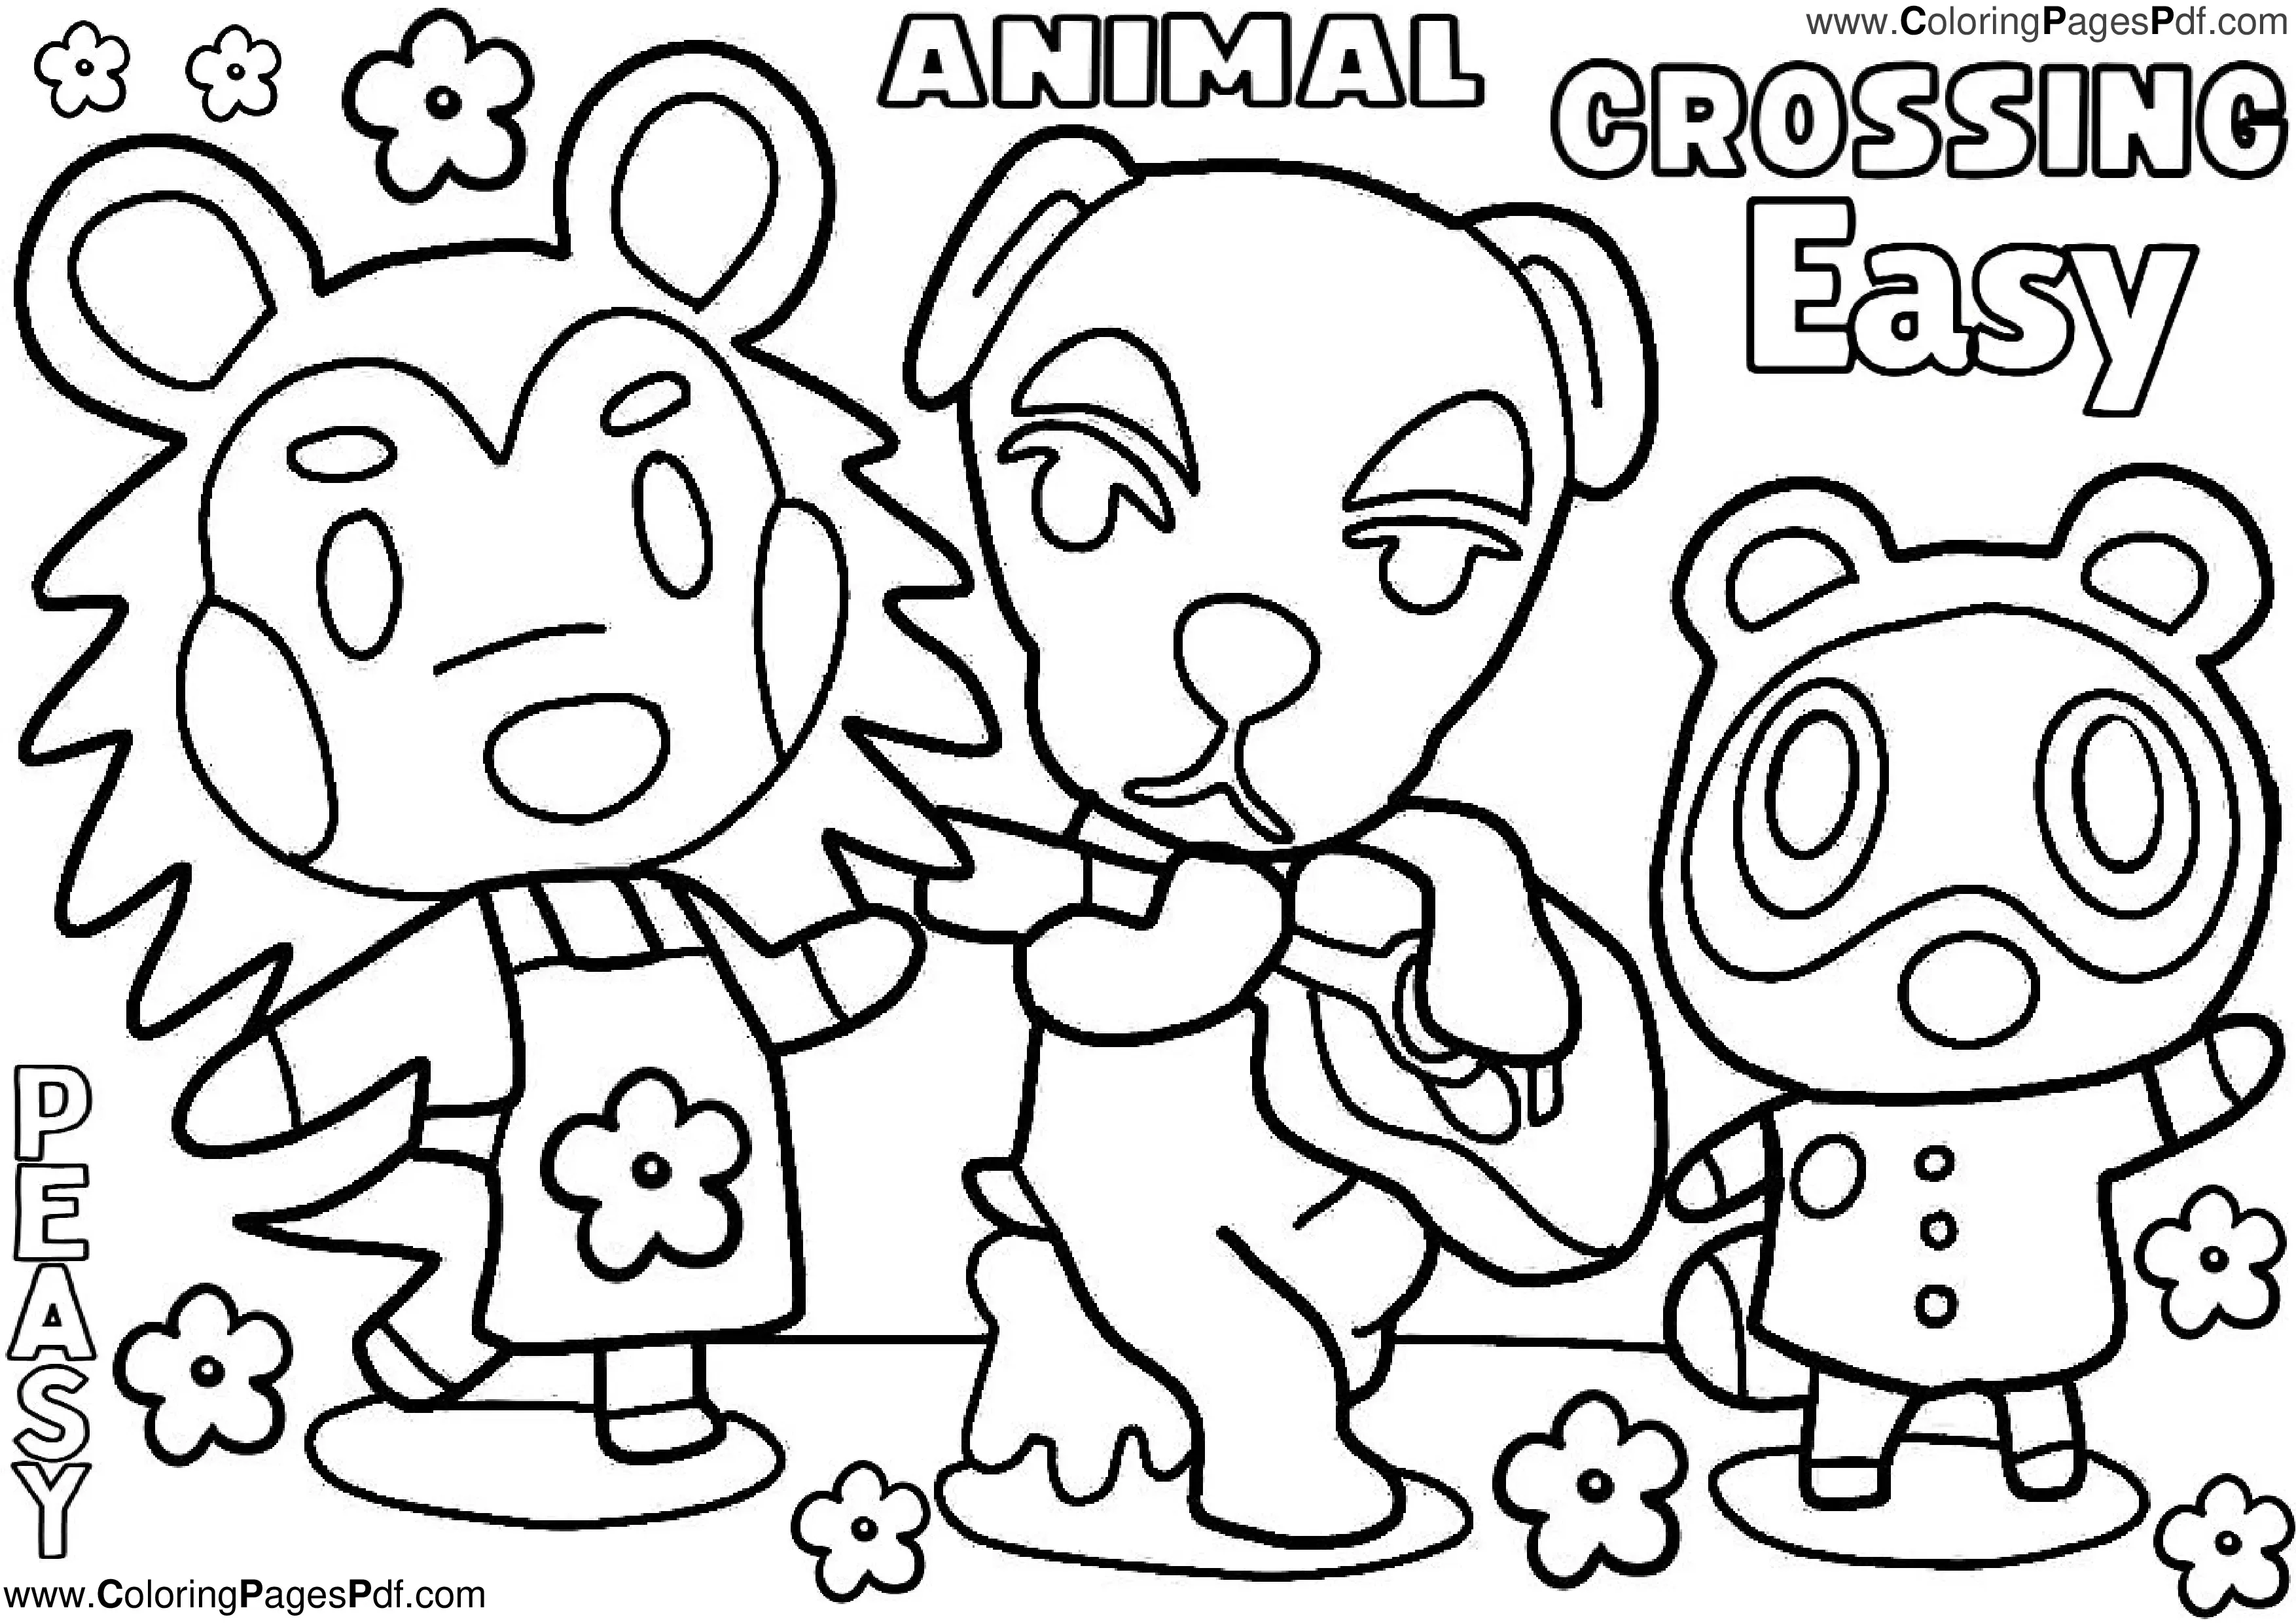 Animal crossing coloring pages for kids